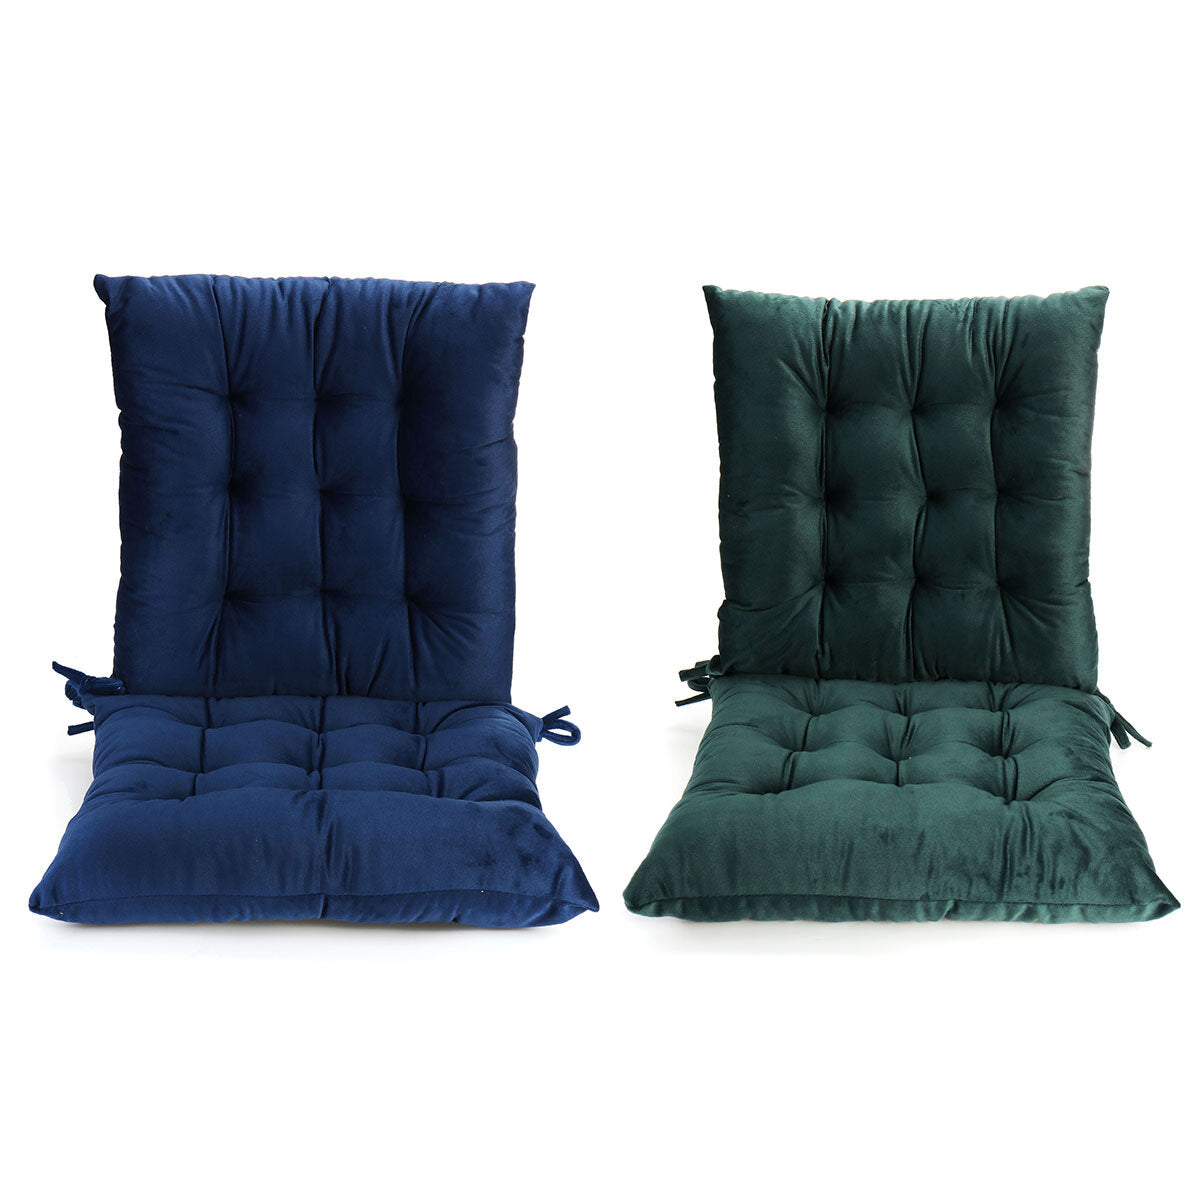 Soft Square Chair Seat Pad Filled Ties Handmade Cushion Decorseat for Kitchen Chairs Home Sofa Cushion 40*40cm